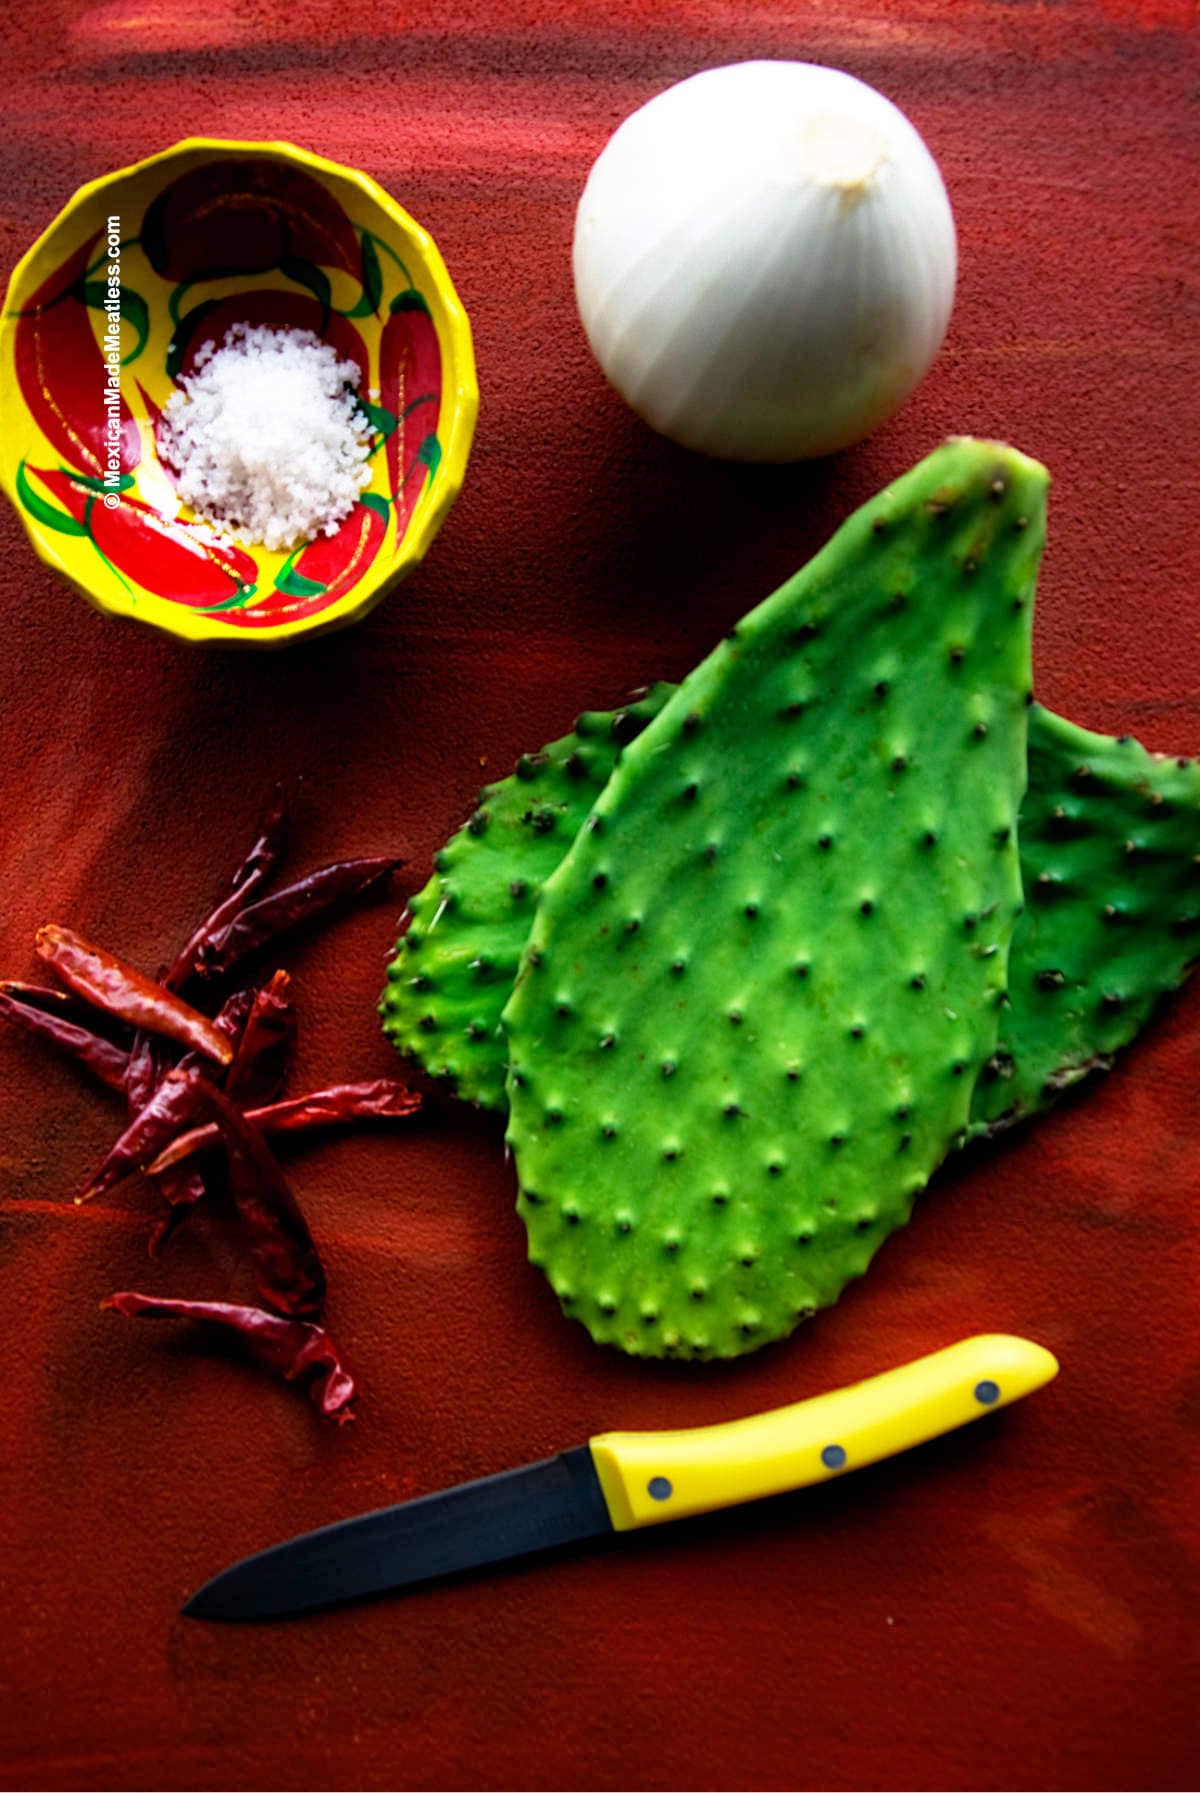 Two nopales paddles on a red table with a white onion, red chilies, and salt.